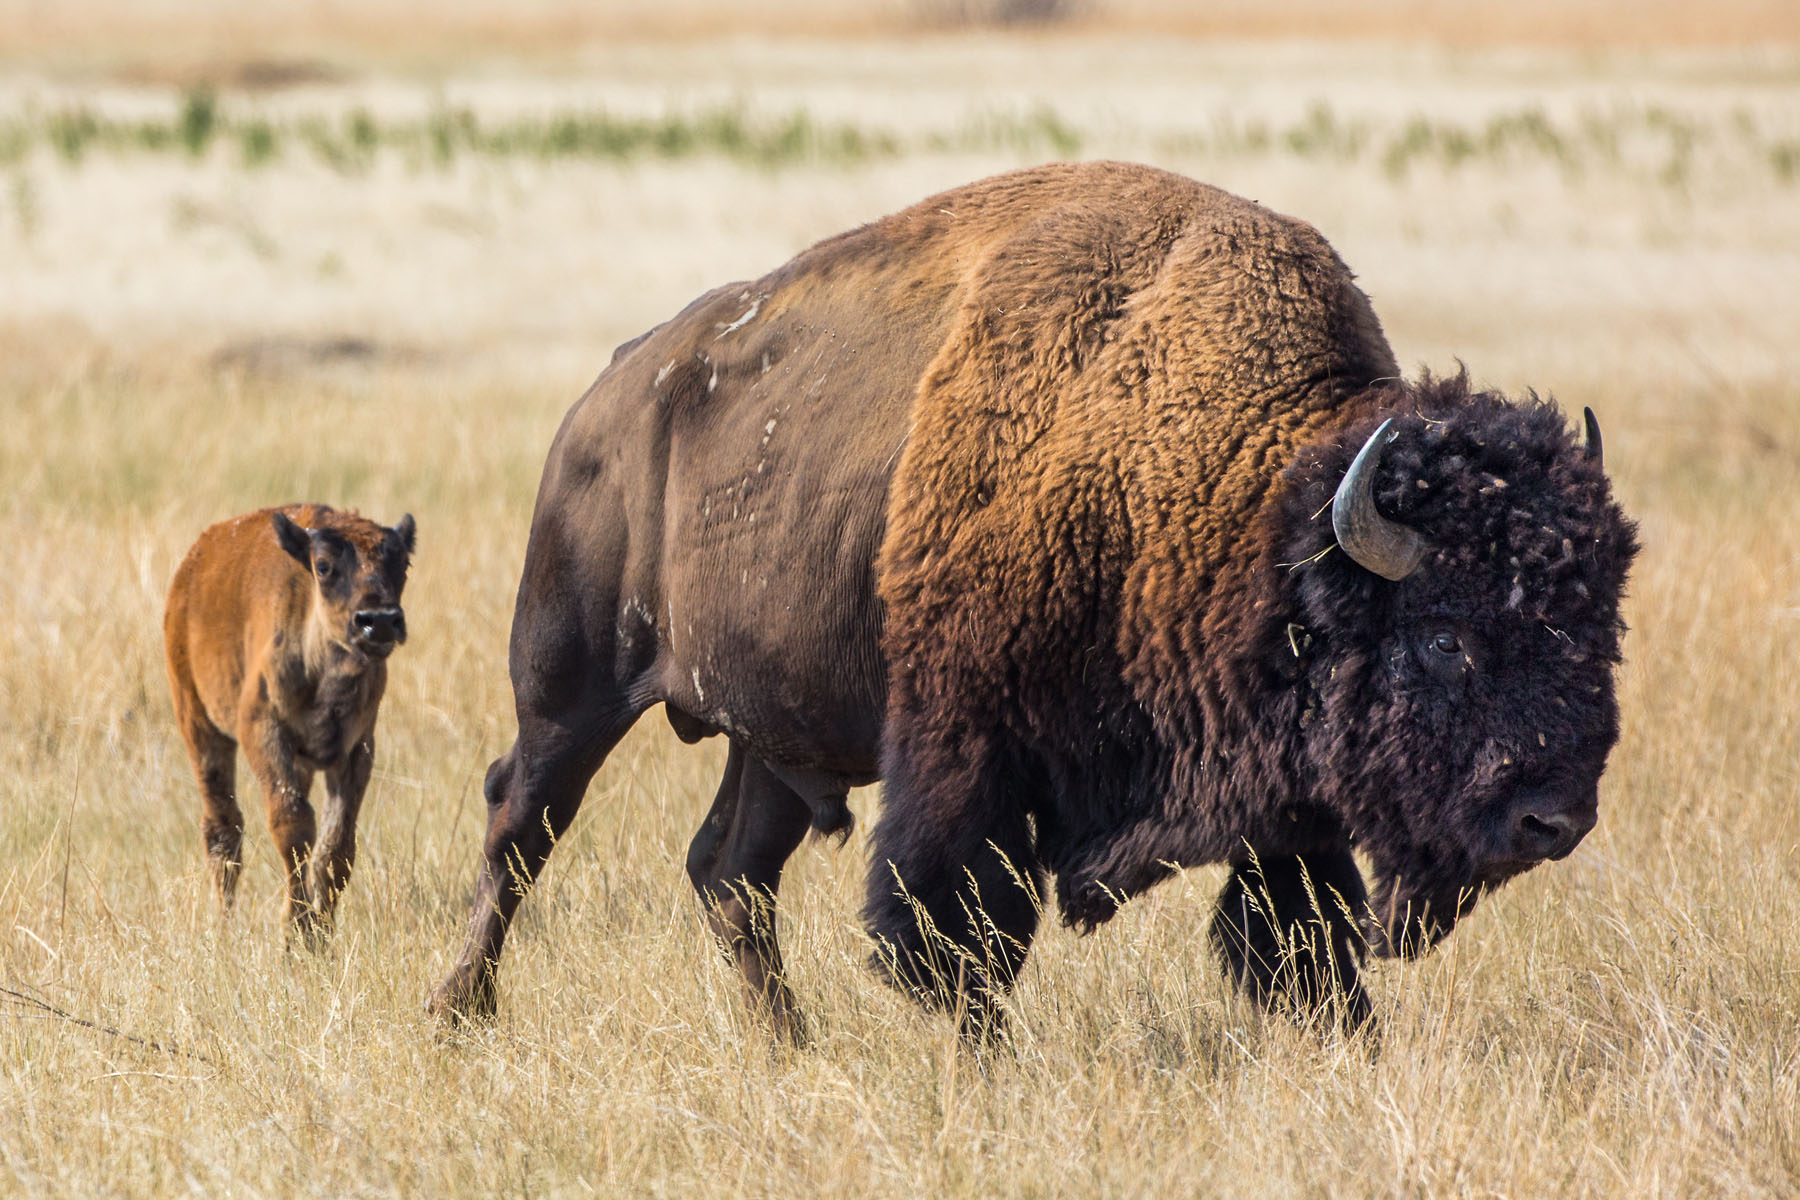 Bison jogging across the prairie near Badlands National Park.  Click for next photo.